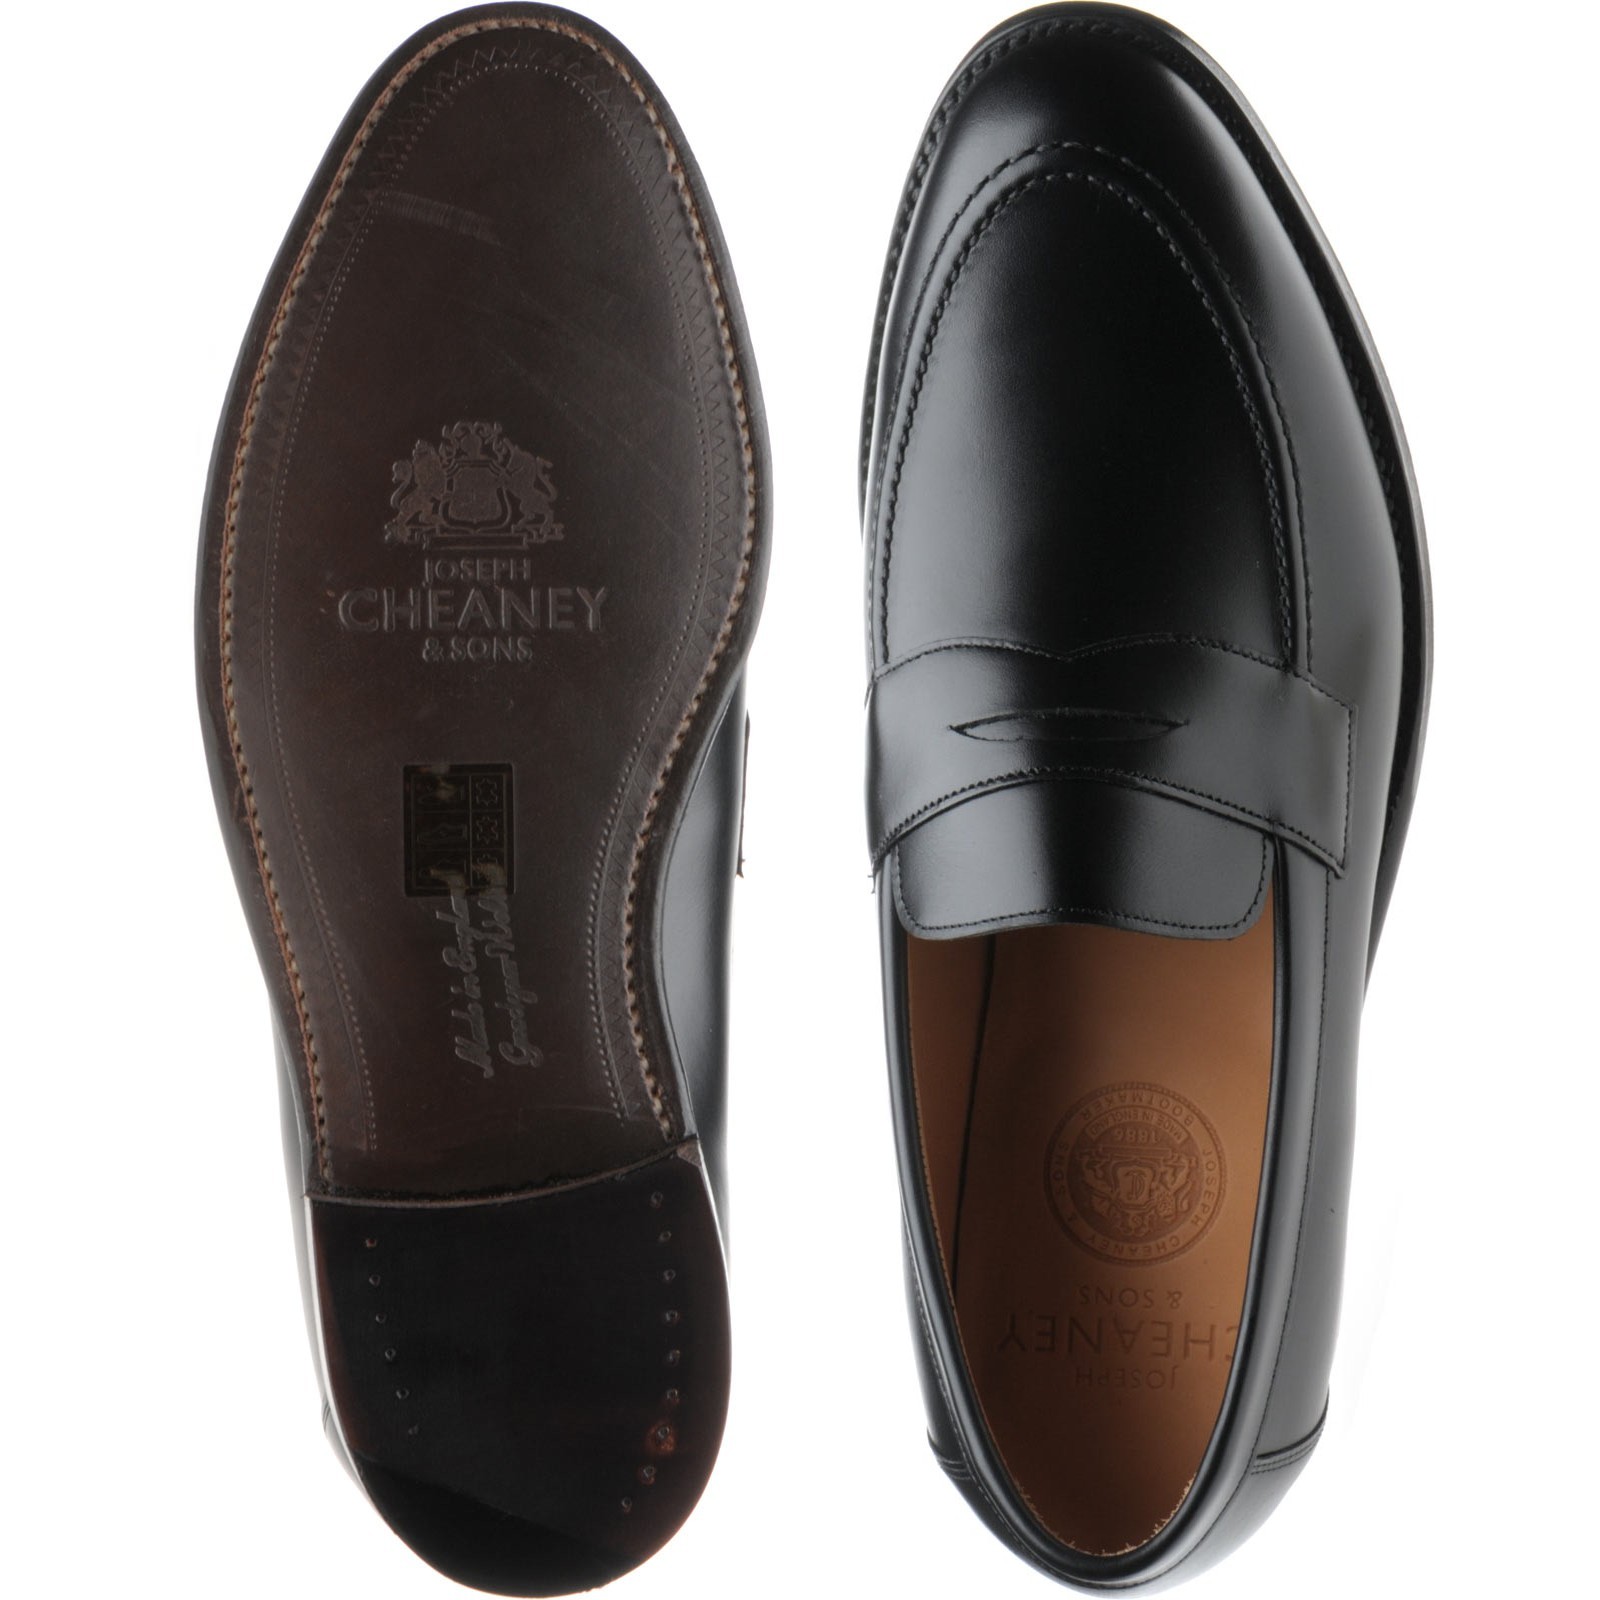 Cheaney shoes | Cheaney of England | Hadley loafers in Black Calf at ...